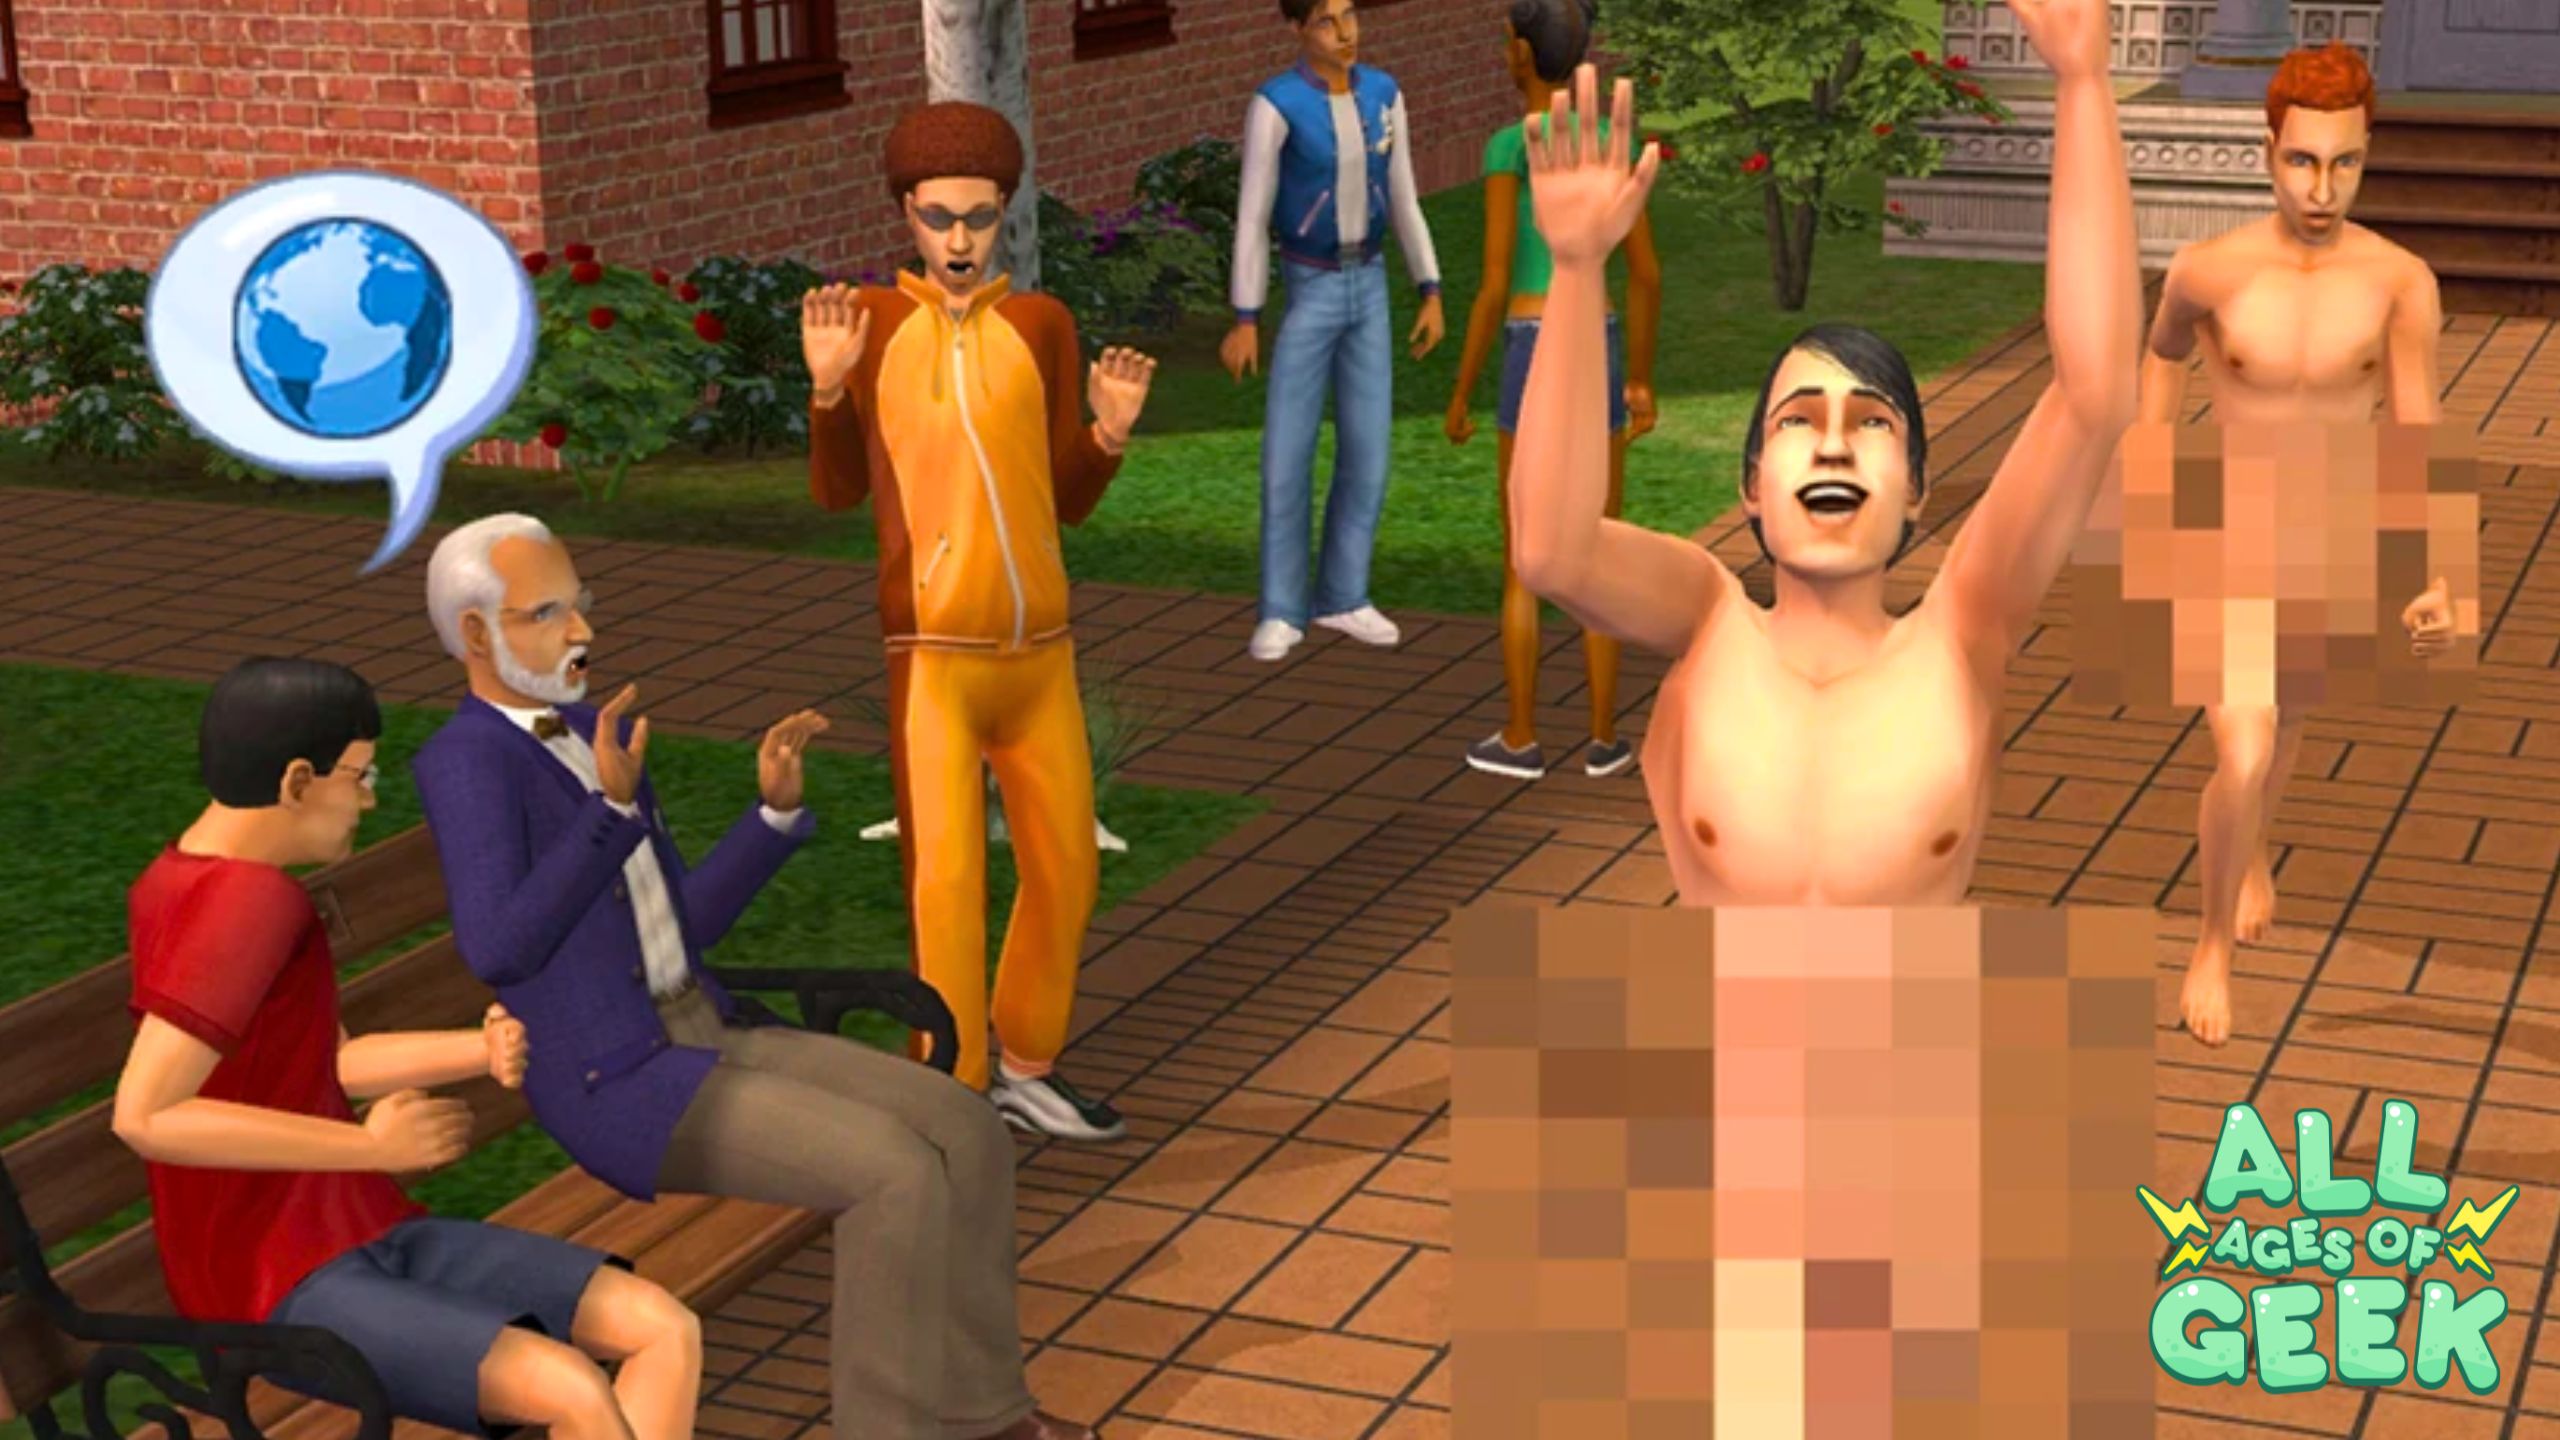 A scene from The Sims 2 game showing a humorous moment in a park. Several Sims characters are interacting, including one in a purple suit animatedly talking, a character in an orange tracksuit with a surprised expression, and two Sims streaking with pixelated censorship. The All Ages of Geek logo is visible in the bottom right corner.